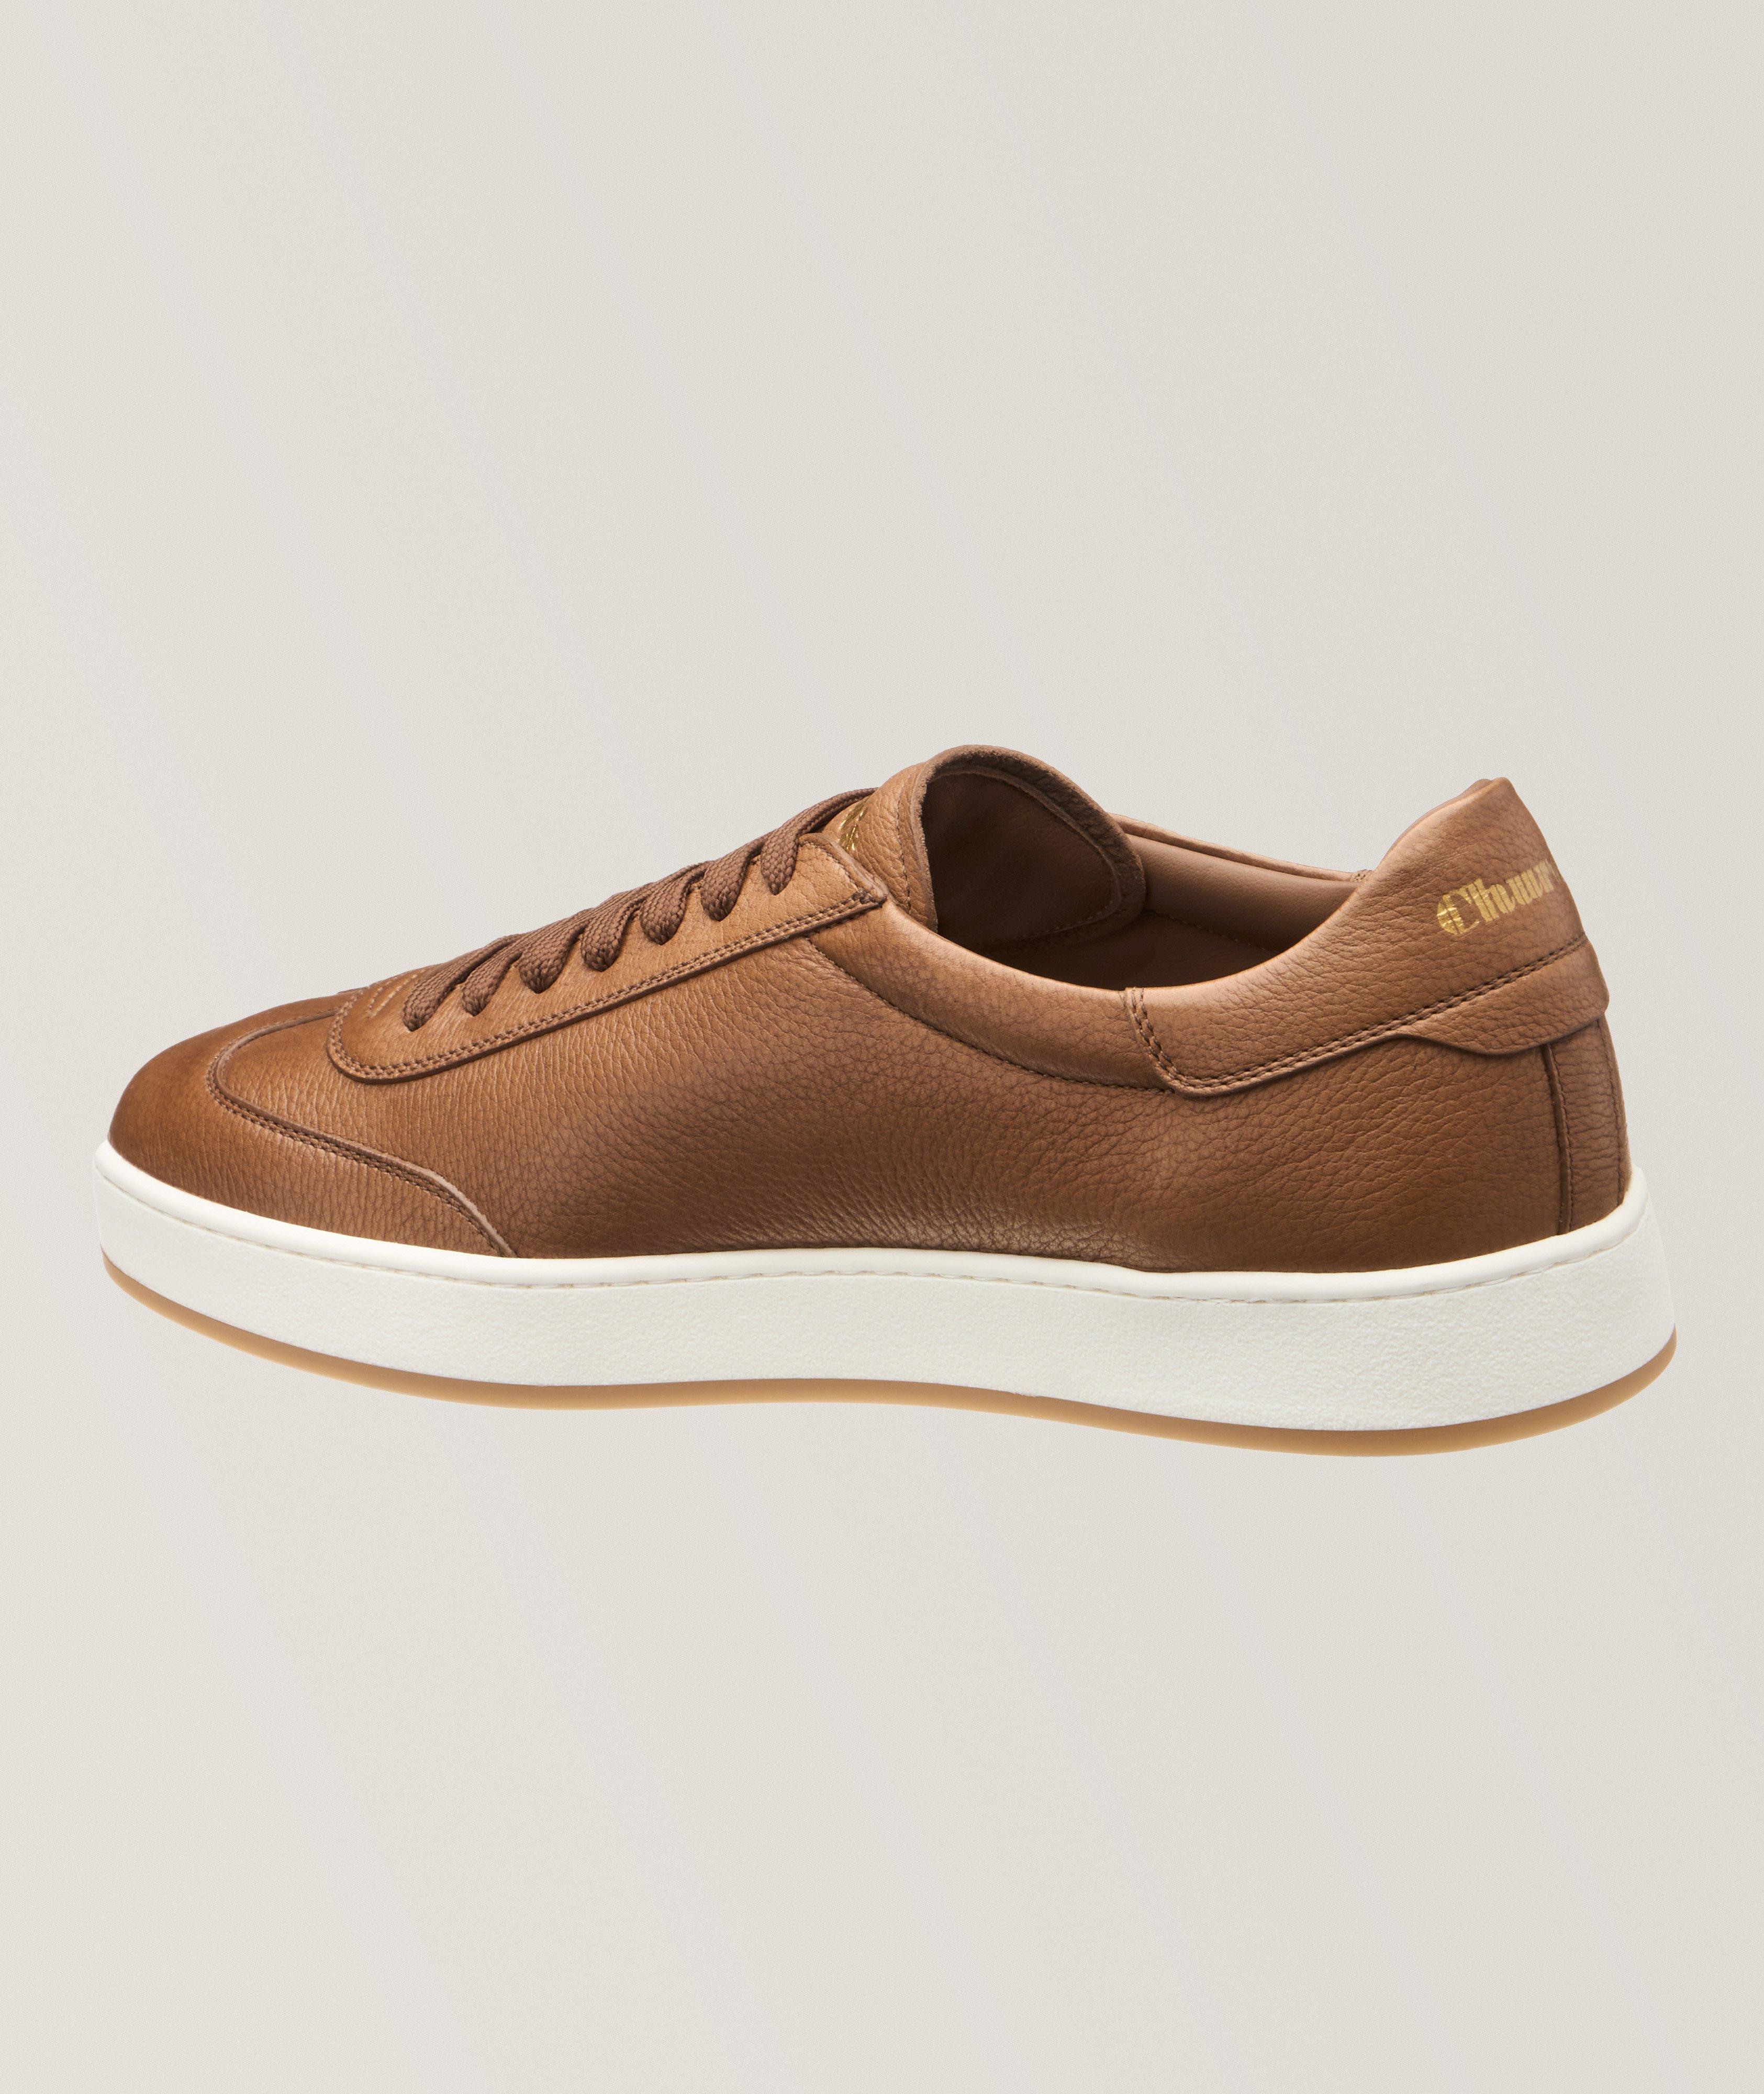 Largs Leather Sneakers image 1